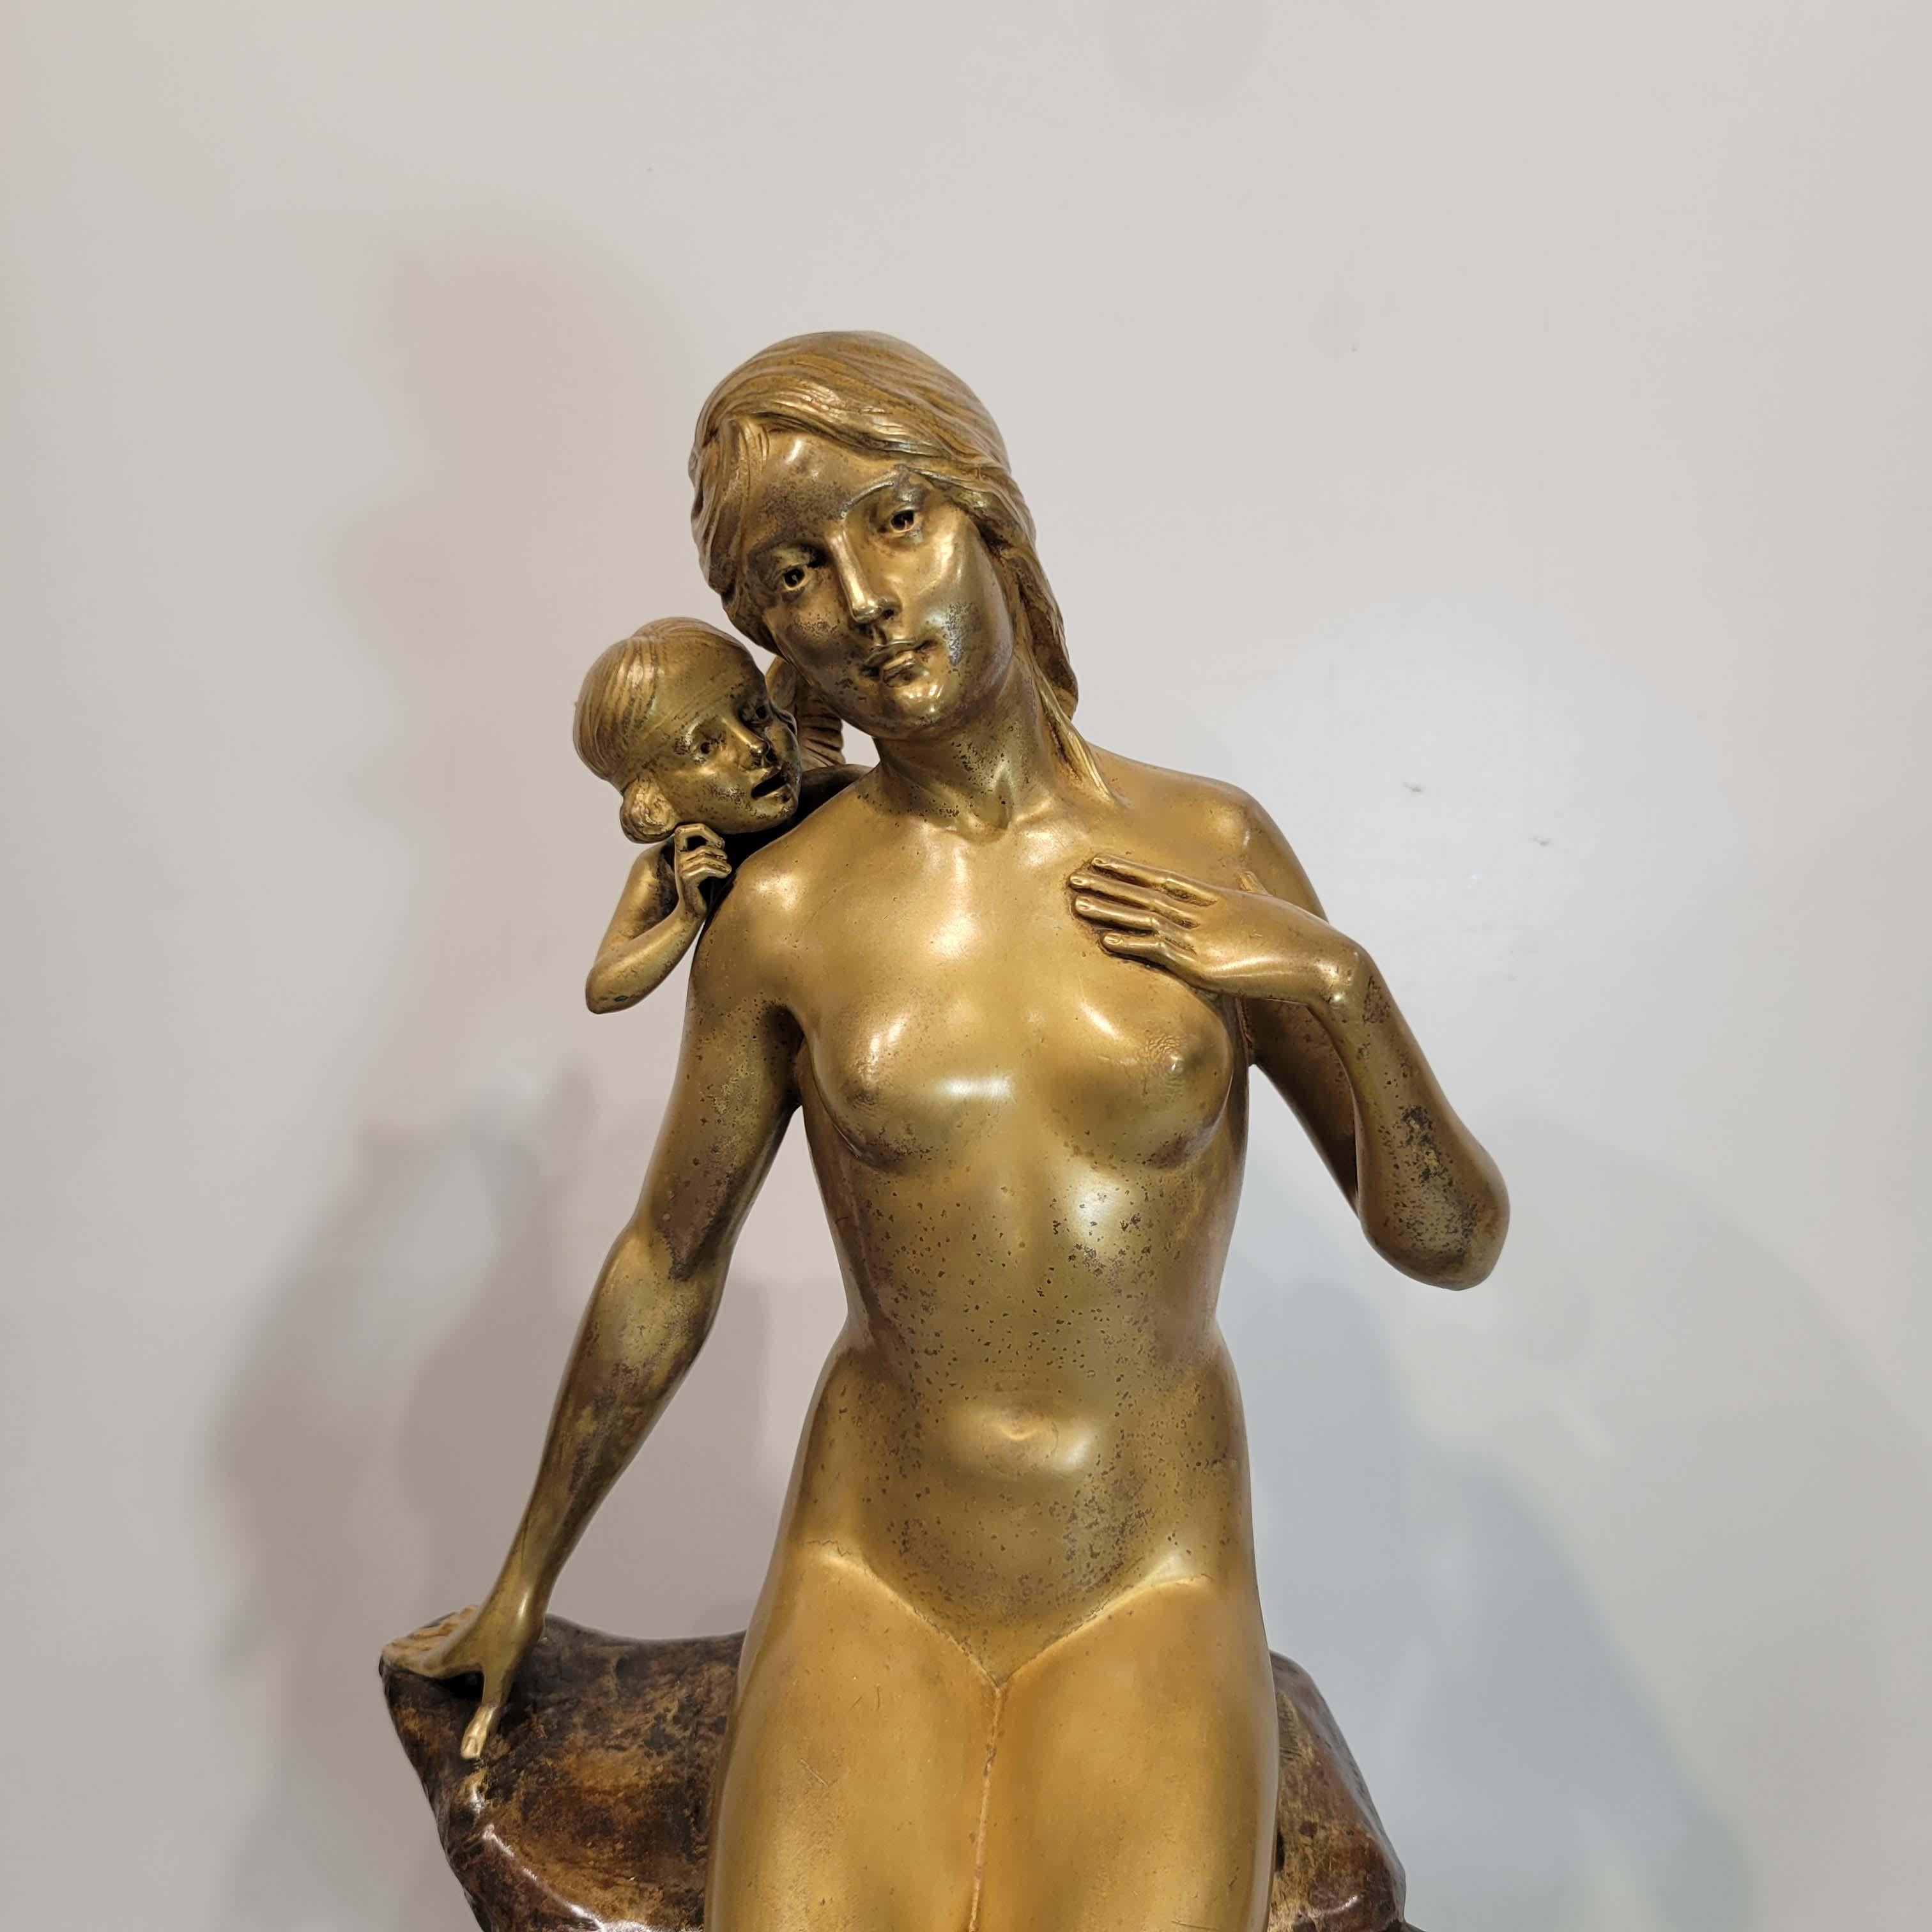 Charles-Eugène Thienot was a highly respected French jeweller, sculptor and Art Noveau artist who exhibited at the prestigious Paris Salon, circa 1900.
This bronze group depicts a beautiful nude nymph listening to a putti whispering in her right